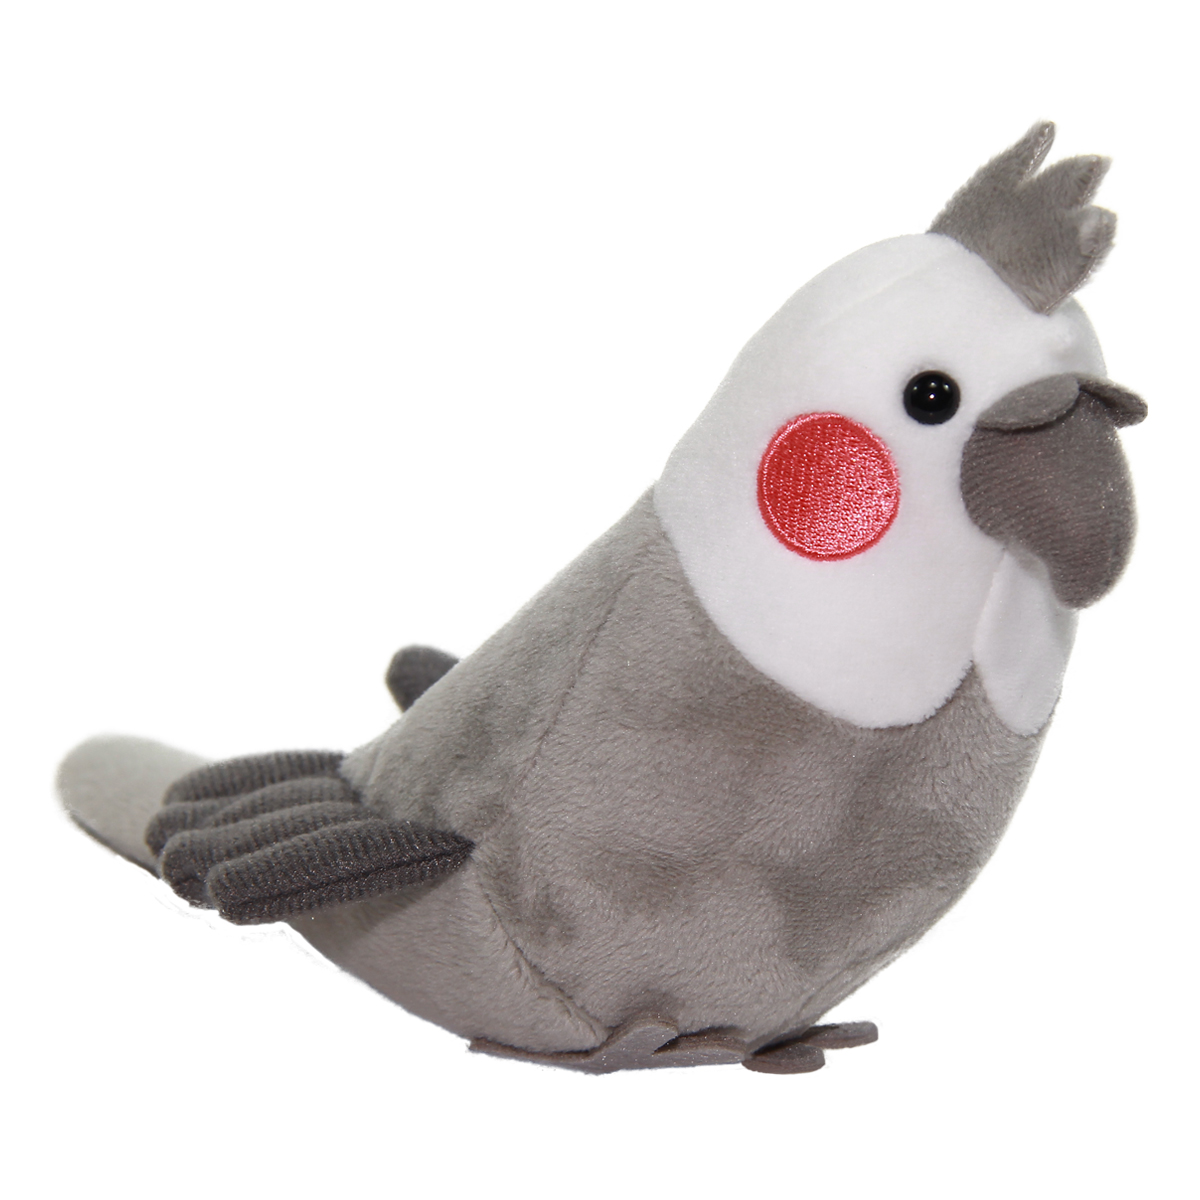 Cockatiel Plush Doll, Cute Birds Collection, Stuffed Animal Toy, Gray, 6 Inches